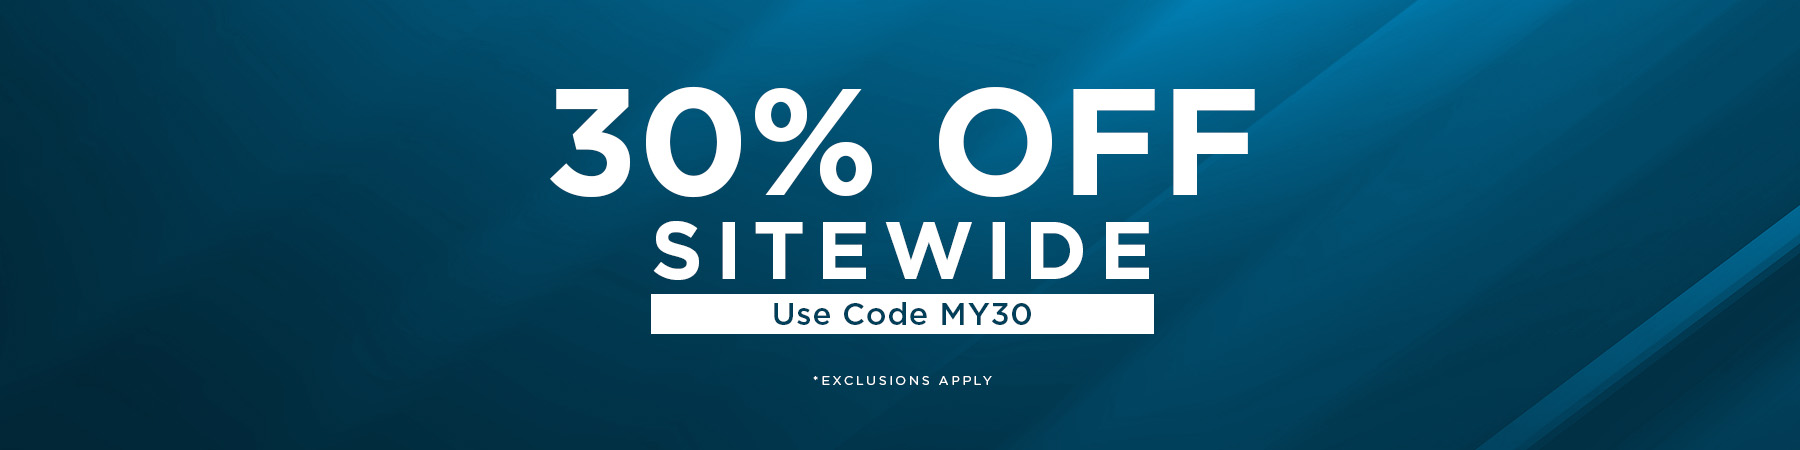 30% Off Sitewide With Code MY30